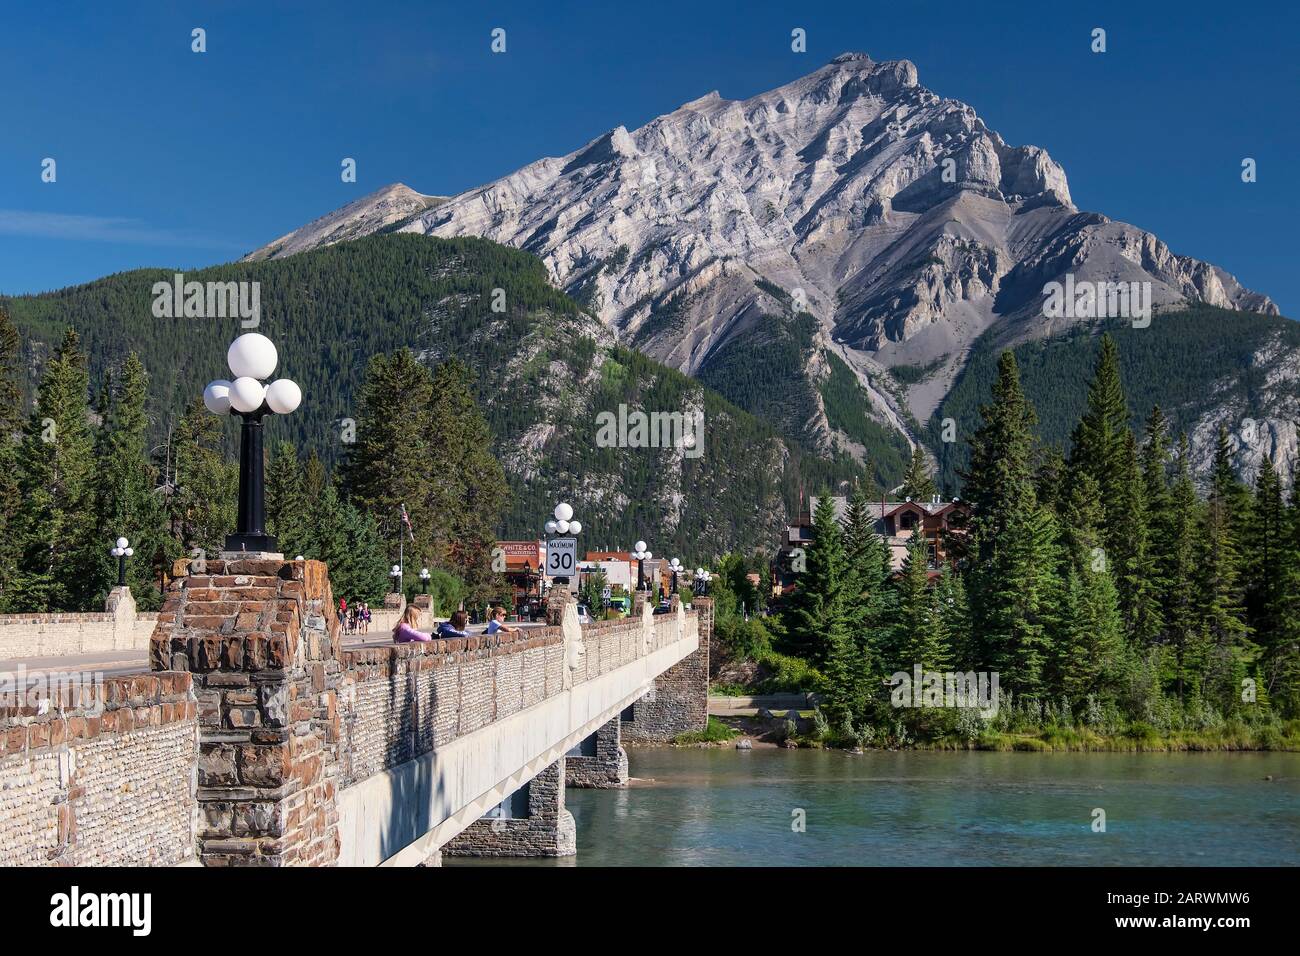 Bow River Bridge and the Bow River, backed by Cascade Mountain, Banff, The Rockies, Alberta, Canada Stock Photo